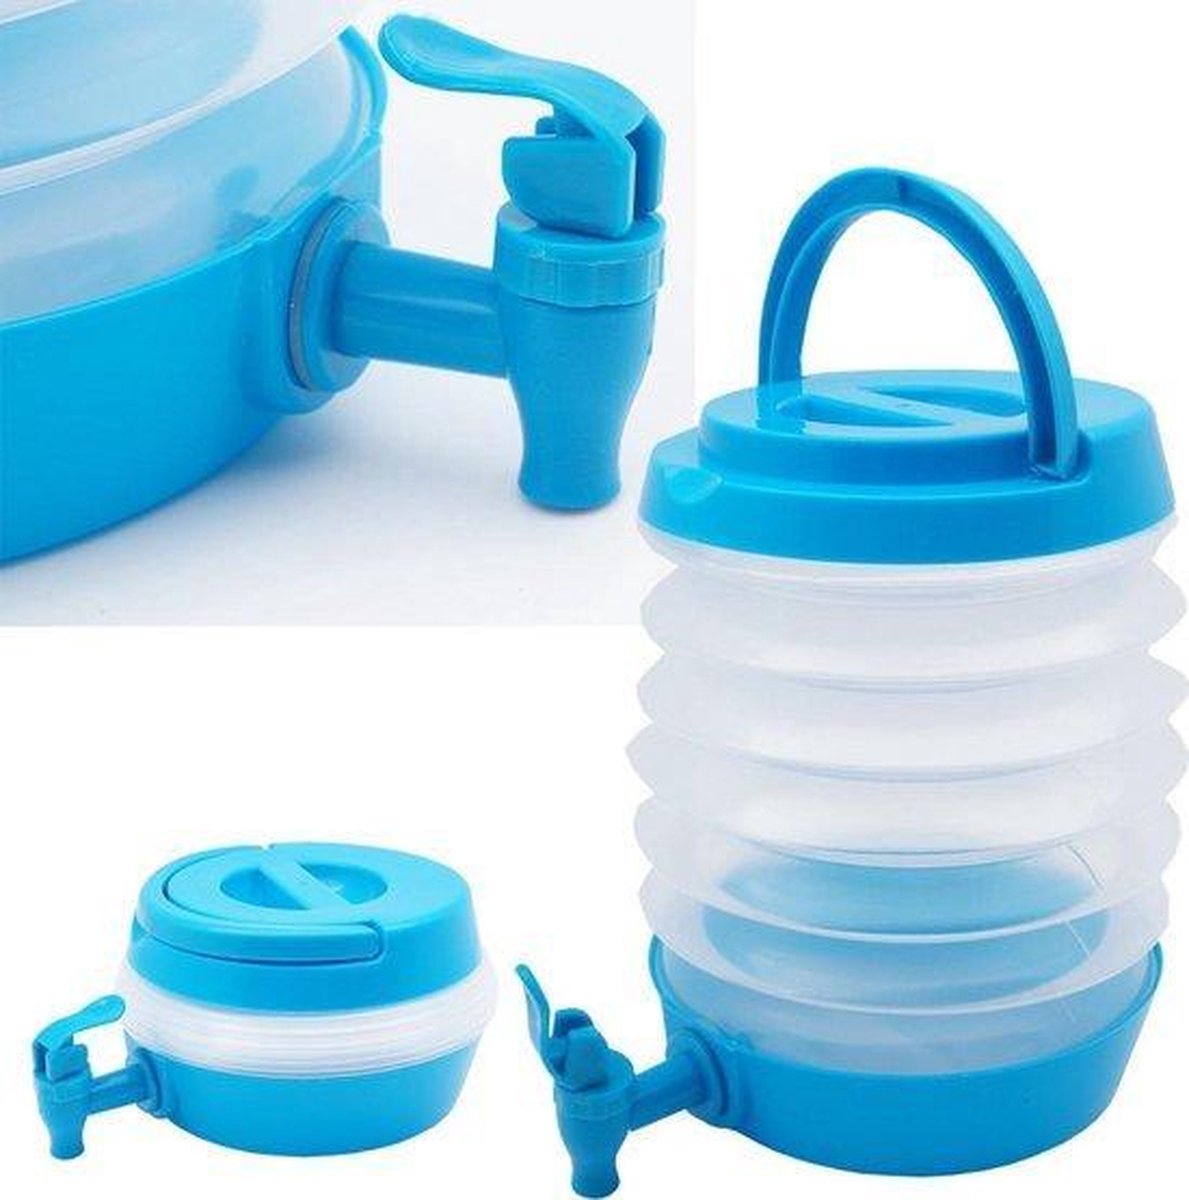 Opvouwbare container tapkraan - & Cold Blauw - 3.3 L - Water Tap | bol.com